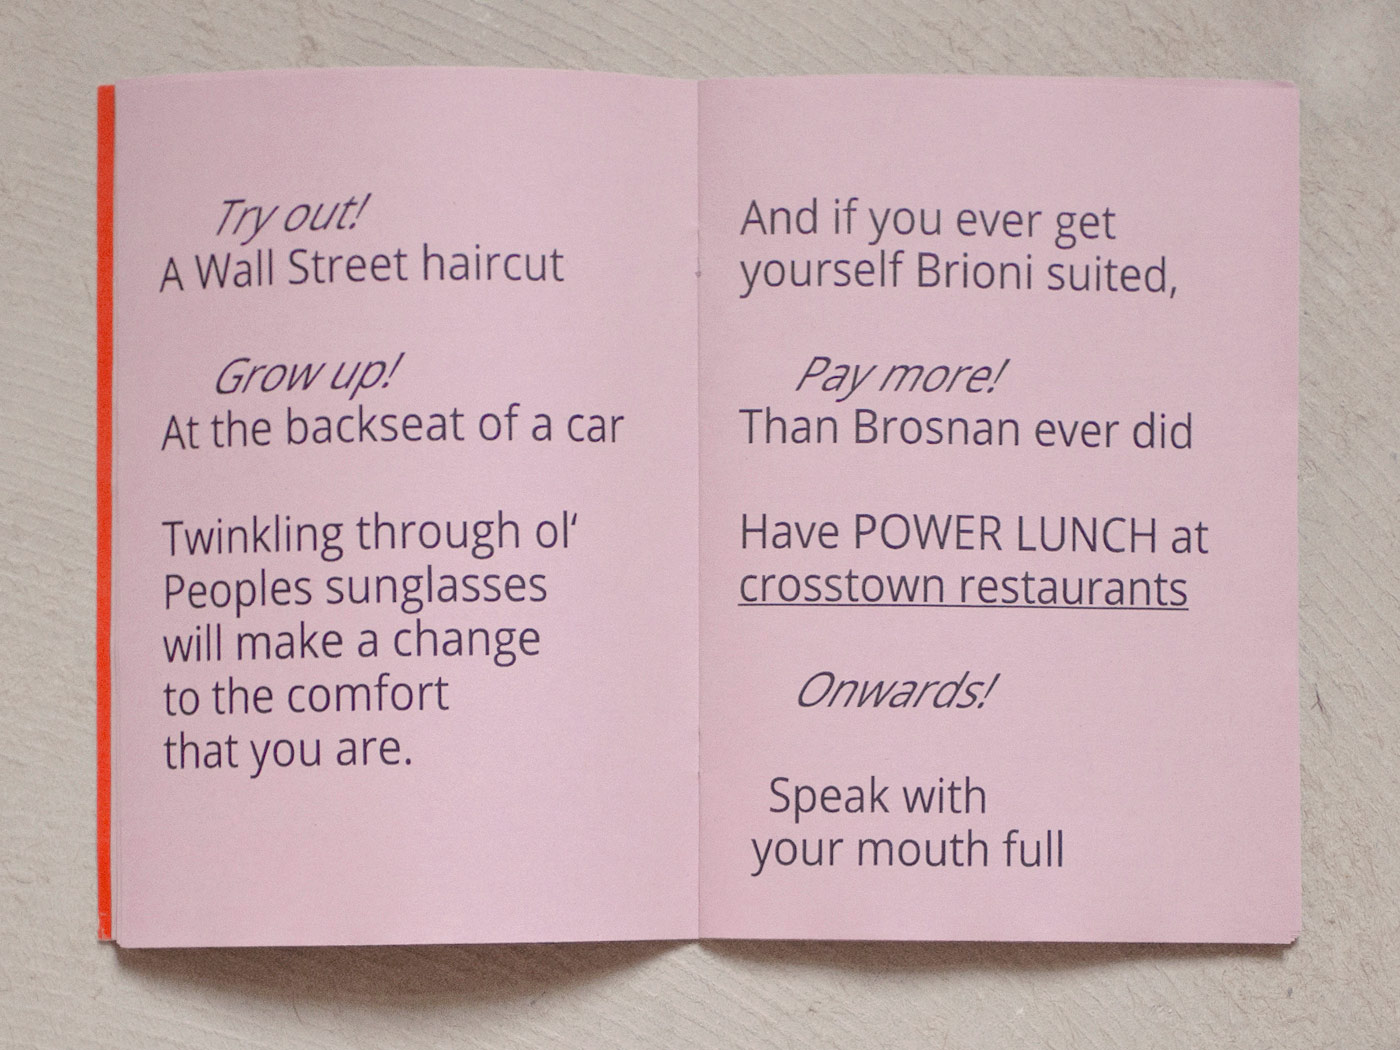 A laid-on booklet with pink-colored side paper and signal orange cover. The open double page shows a poem about the stock exchange. The poem is printed in a sans serif font.